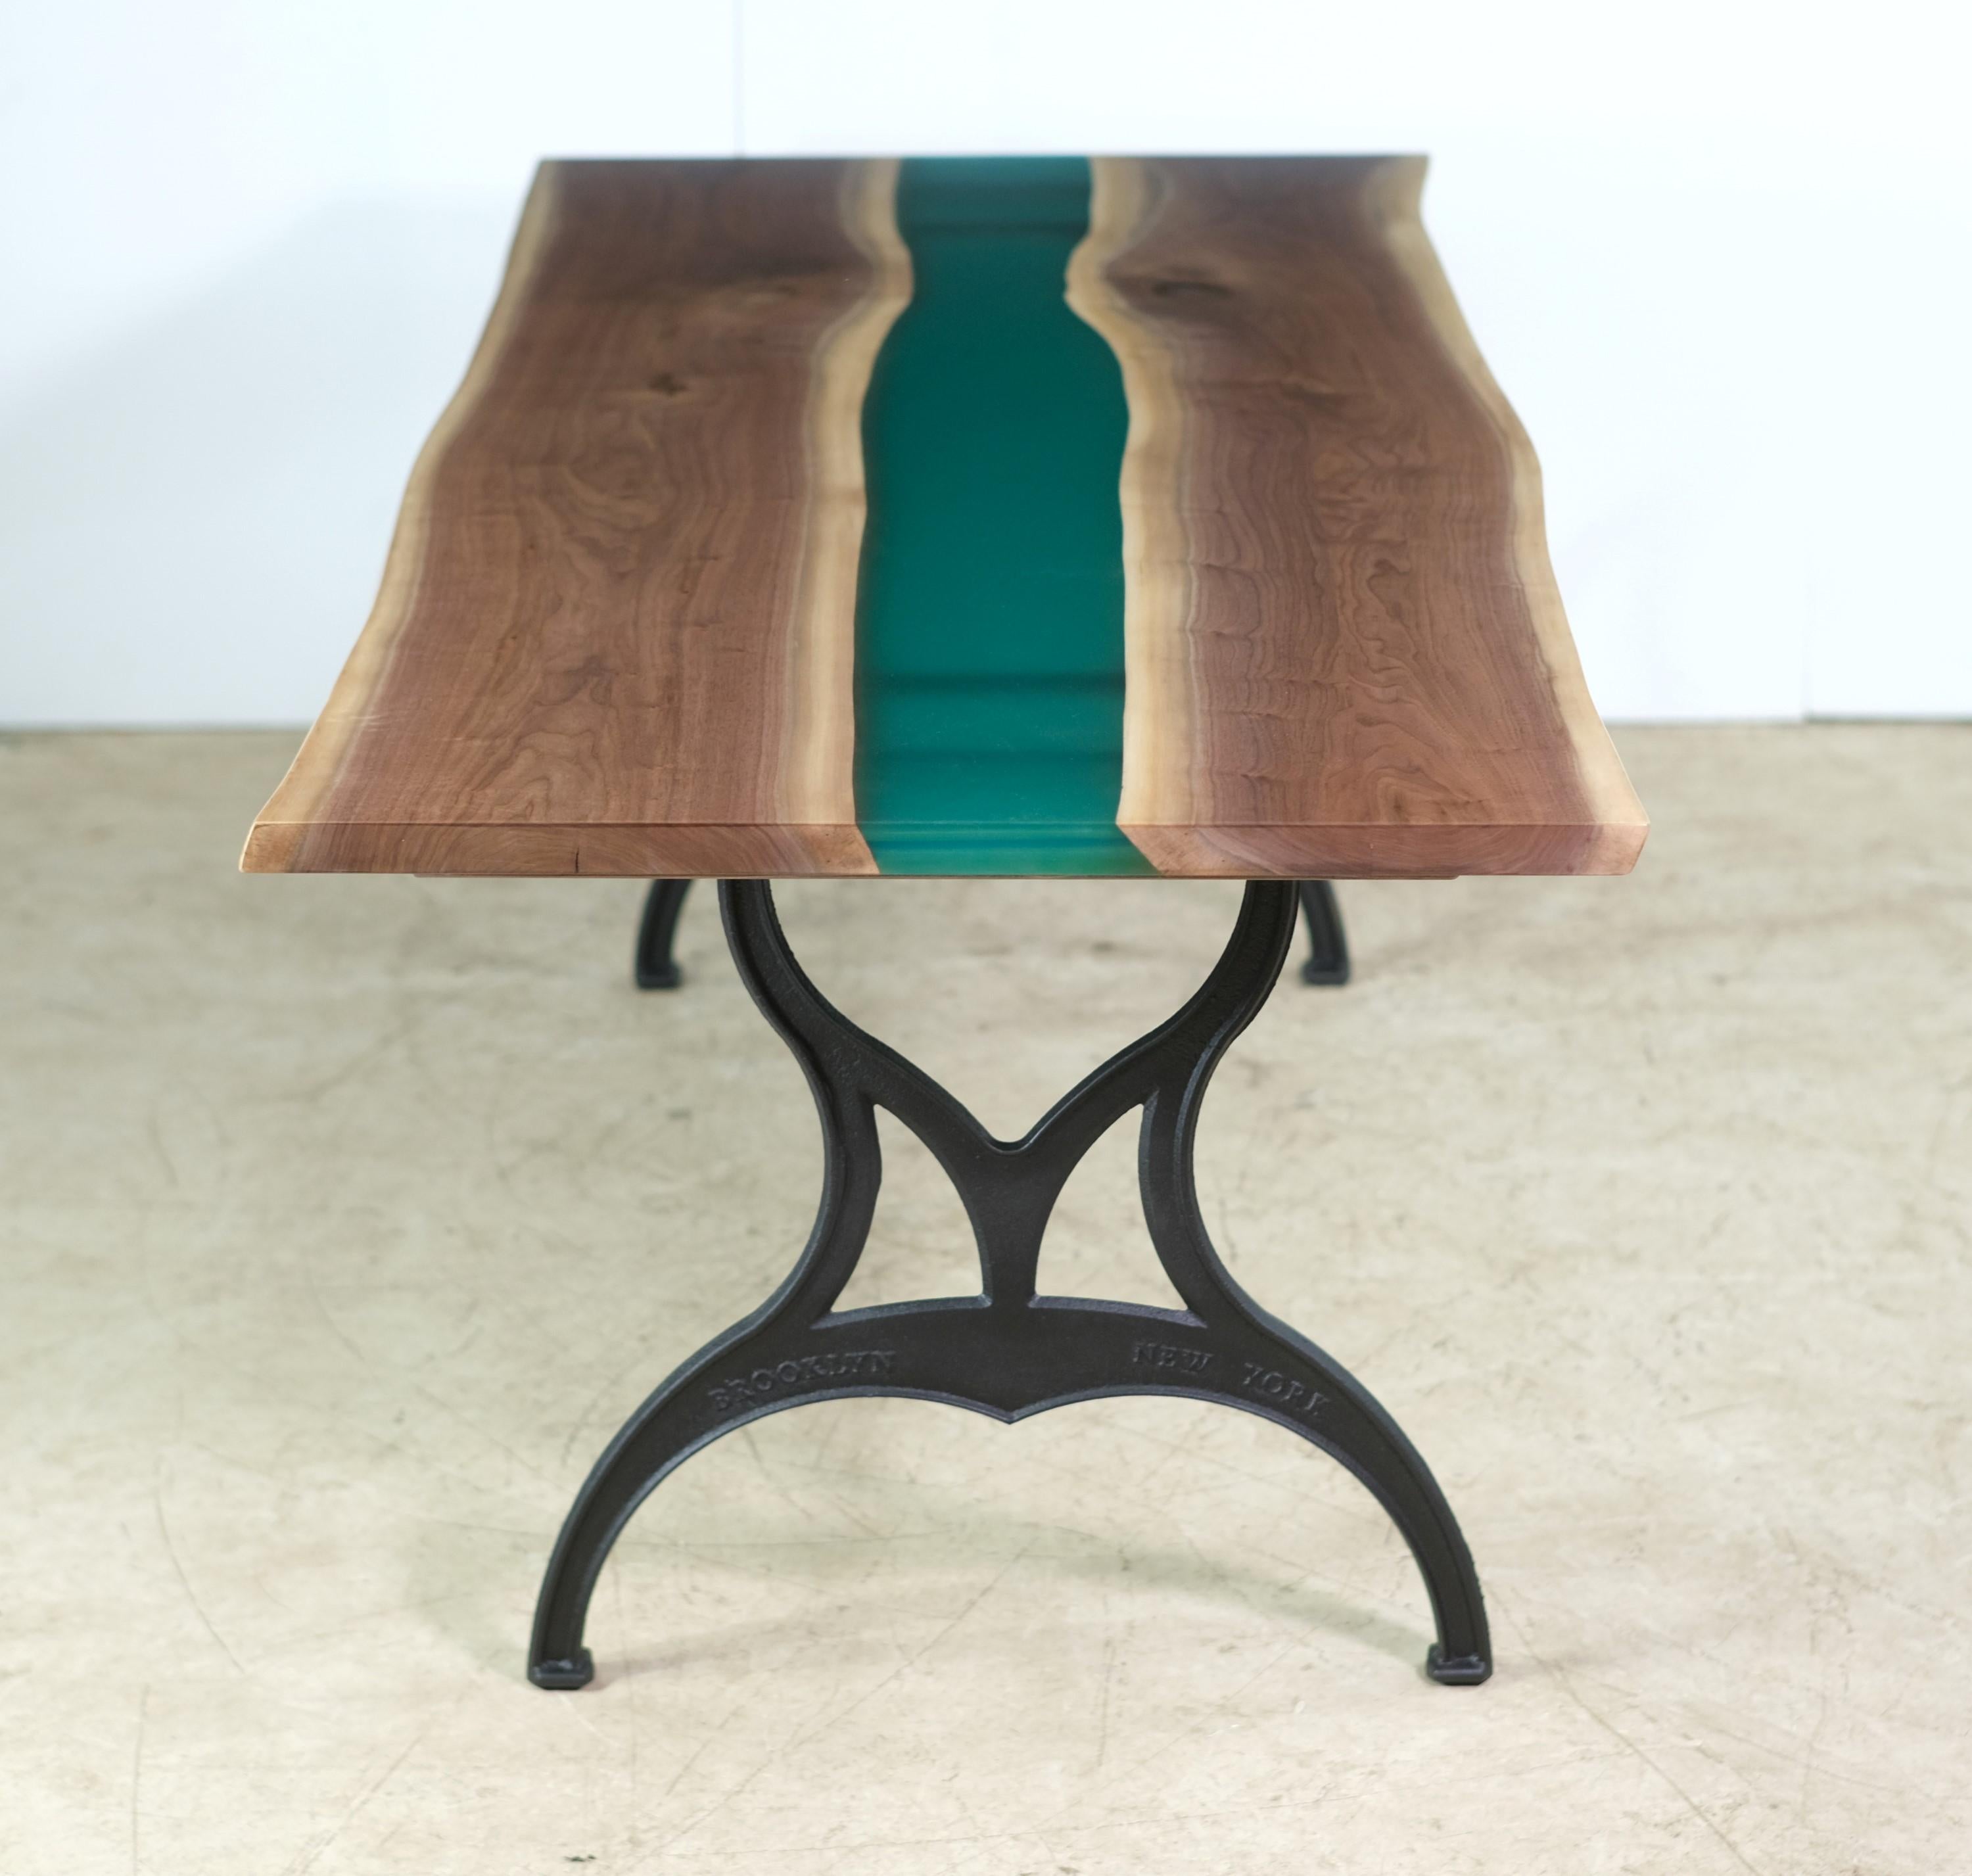 This table features a live edge two slab walnut top with a blueish green epoxy resin pour paired with Brooklyn New York cast iron legs. This table is ready to ship. Please note, this item is located in our Scranton, PA location.